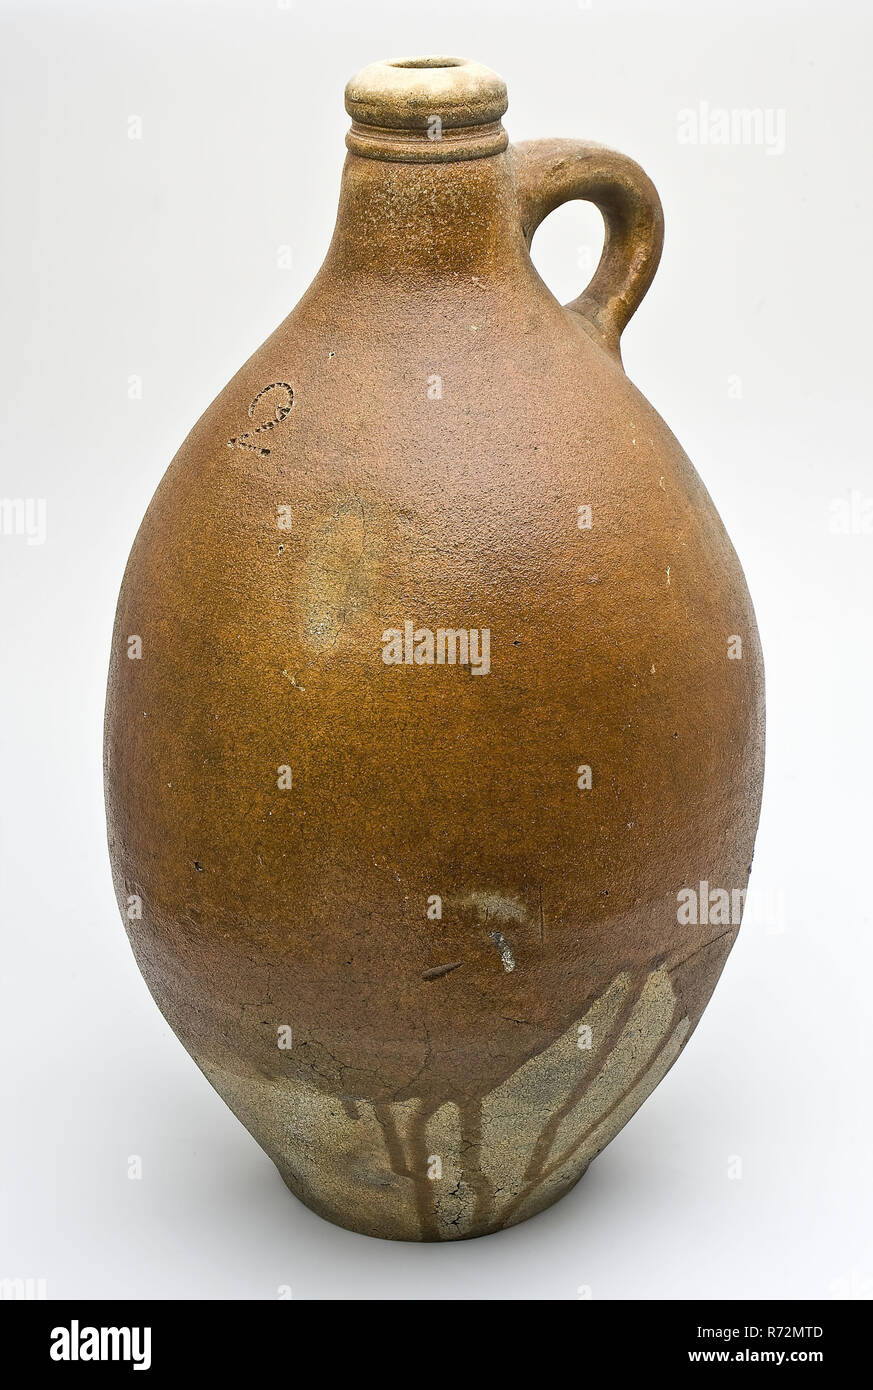 Stoneware jug, bulb model with sparing, brown glaze and number 2, jug holder soil found ceramic stoneware glaze salt glaze, hand-turned glazed baked stoneware jar sparingly brown glazed lower half of the belly in unglazed on some tears after elongated sphere model. Stand surface with subtraction traces Vertical sausage ear On the belly at the front number on the front number: 2 archeology Rotterdam Kralingen-Crooswijk Struisenburg Oostmaaslaan Buizengat indigenous pottery import store packaging drinking kitchen Soil discovery: Buizengat Oostmaaslaan Rotterdam an old landfill of municipal waste Stock Photo